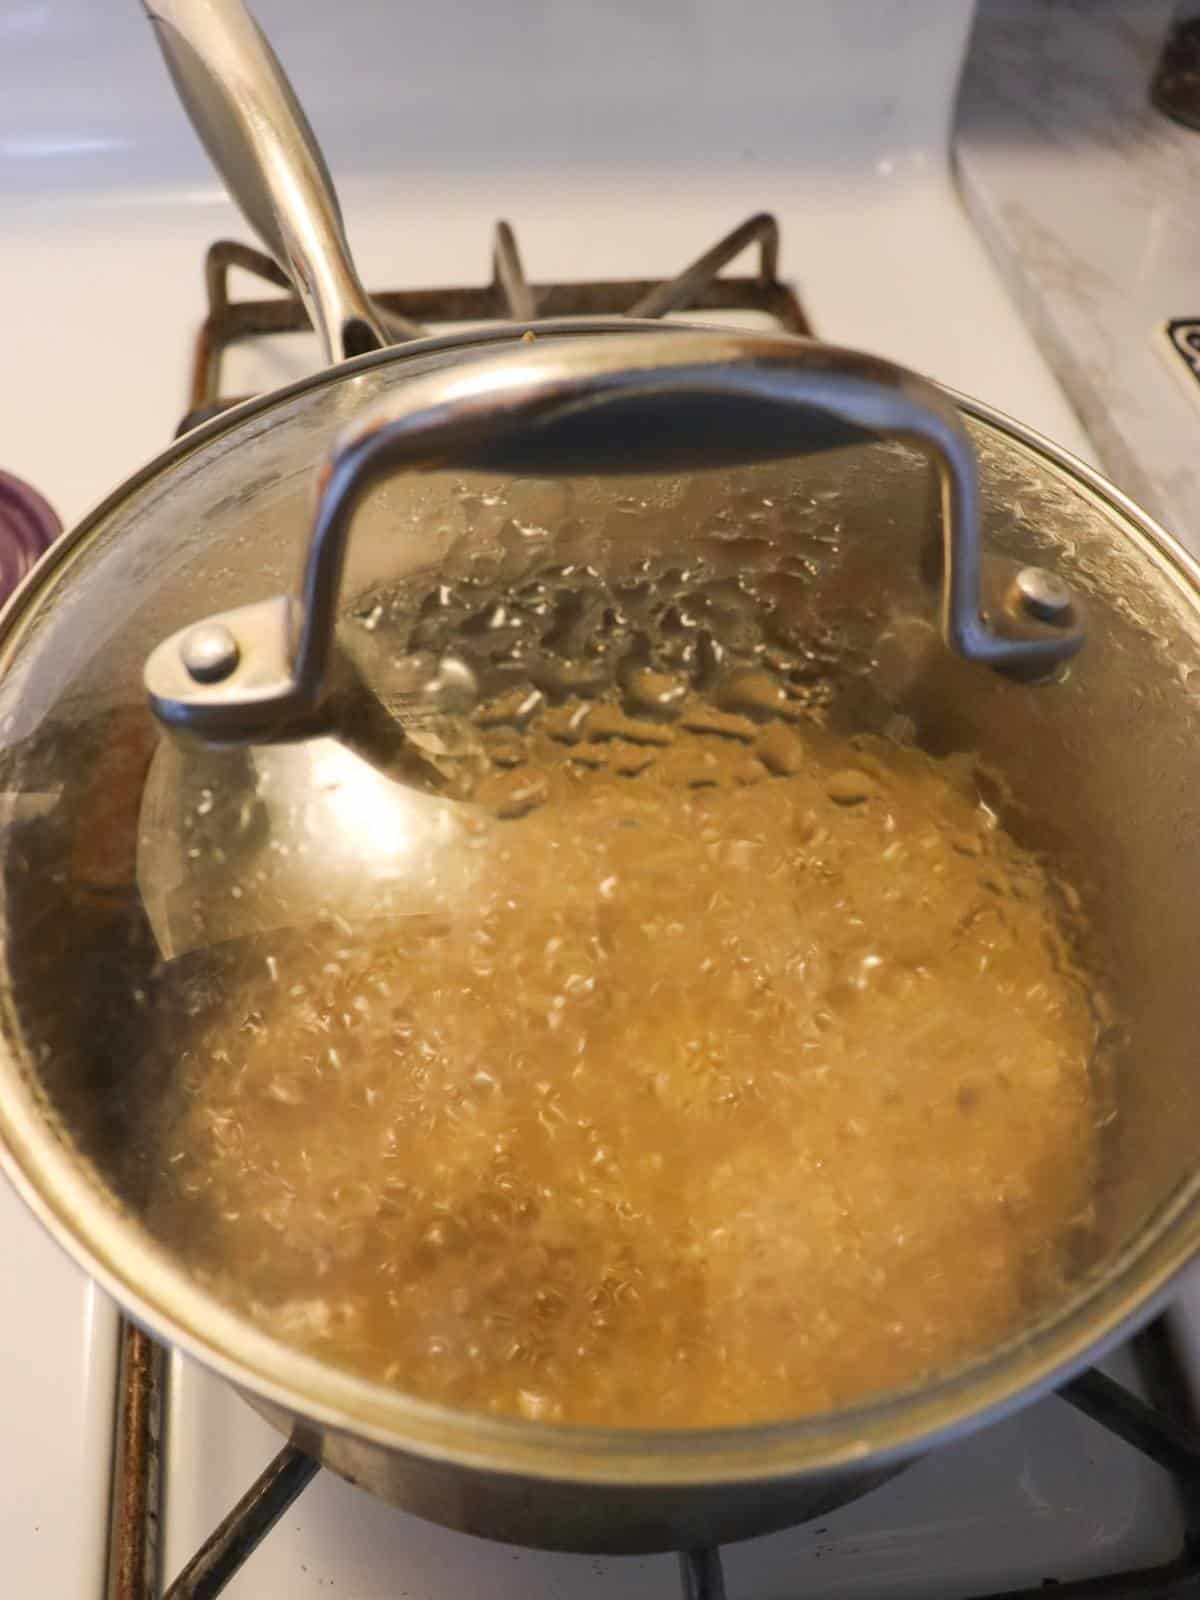 Quinoa cooking in a pan on a stove with the lid on.